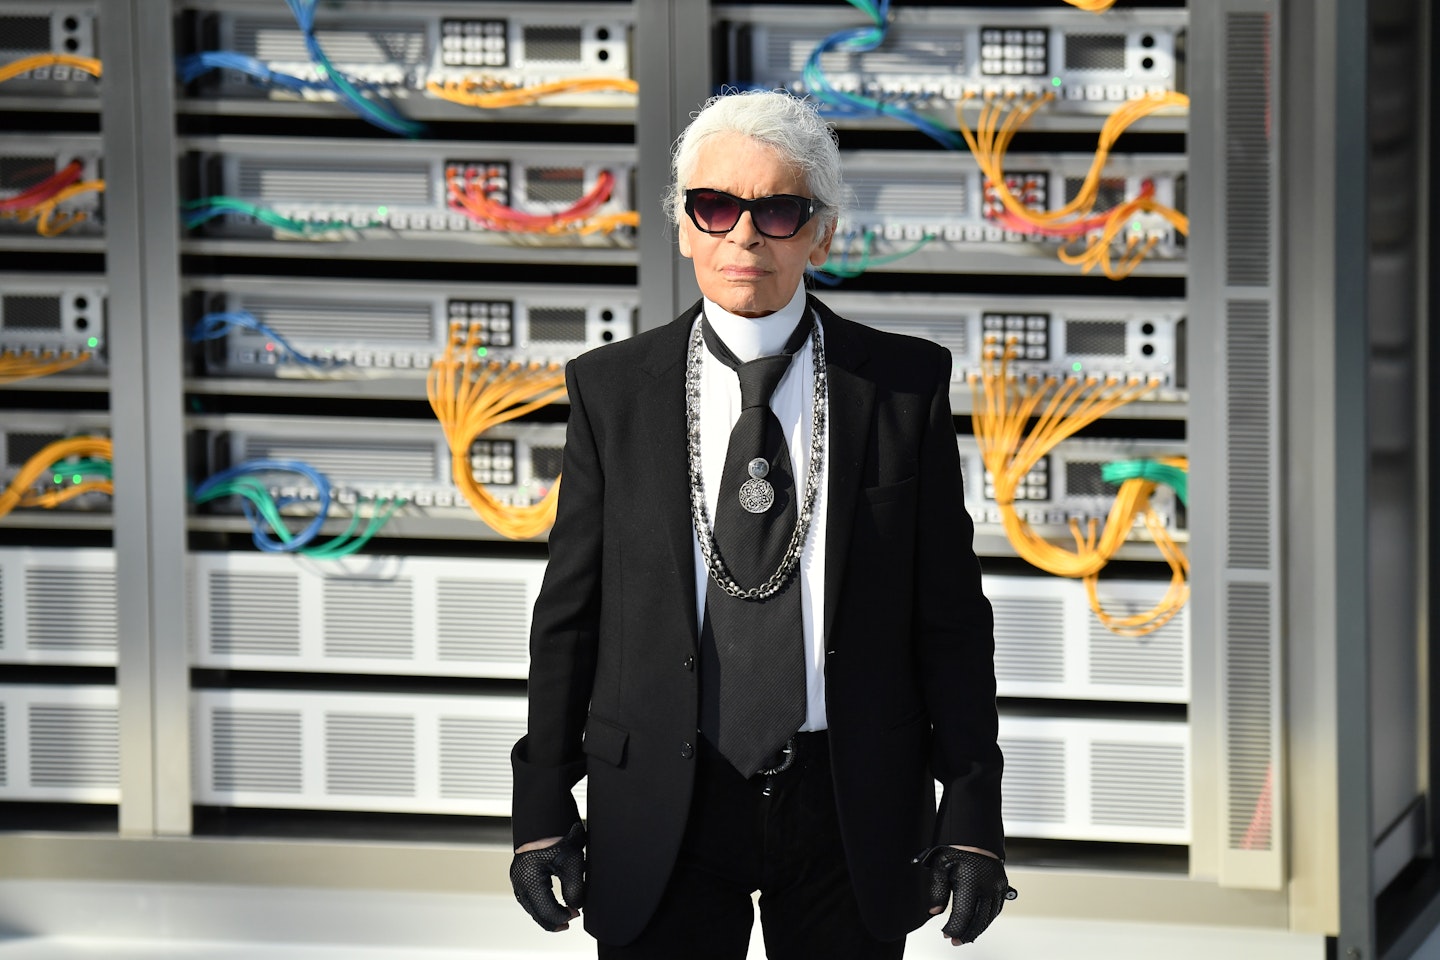 Chanel haute couture show goes on without Karl Lagerfeld